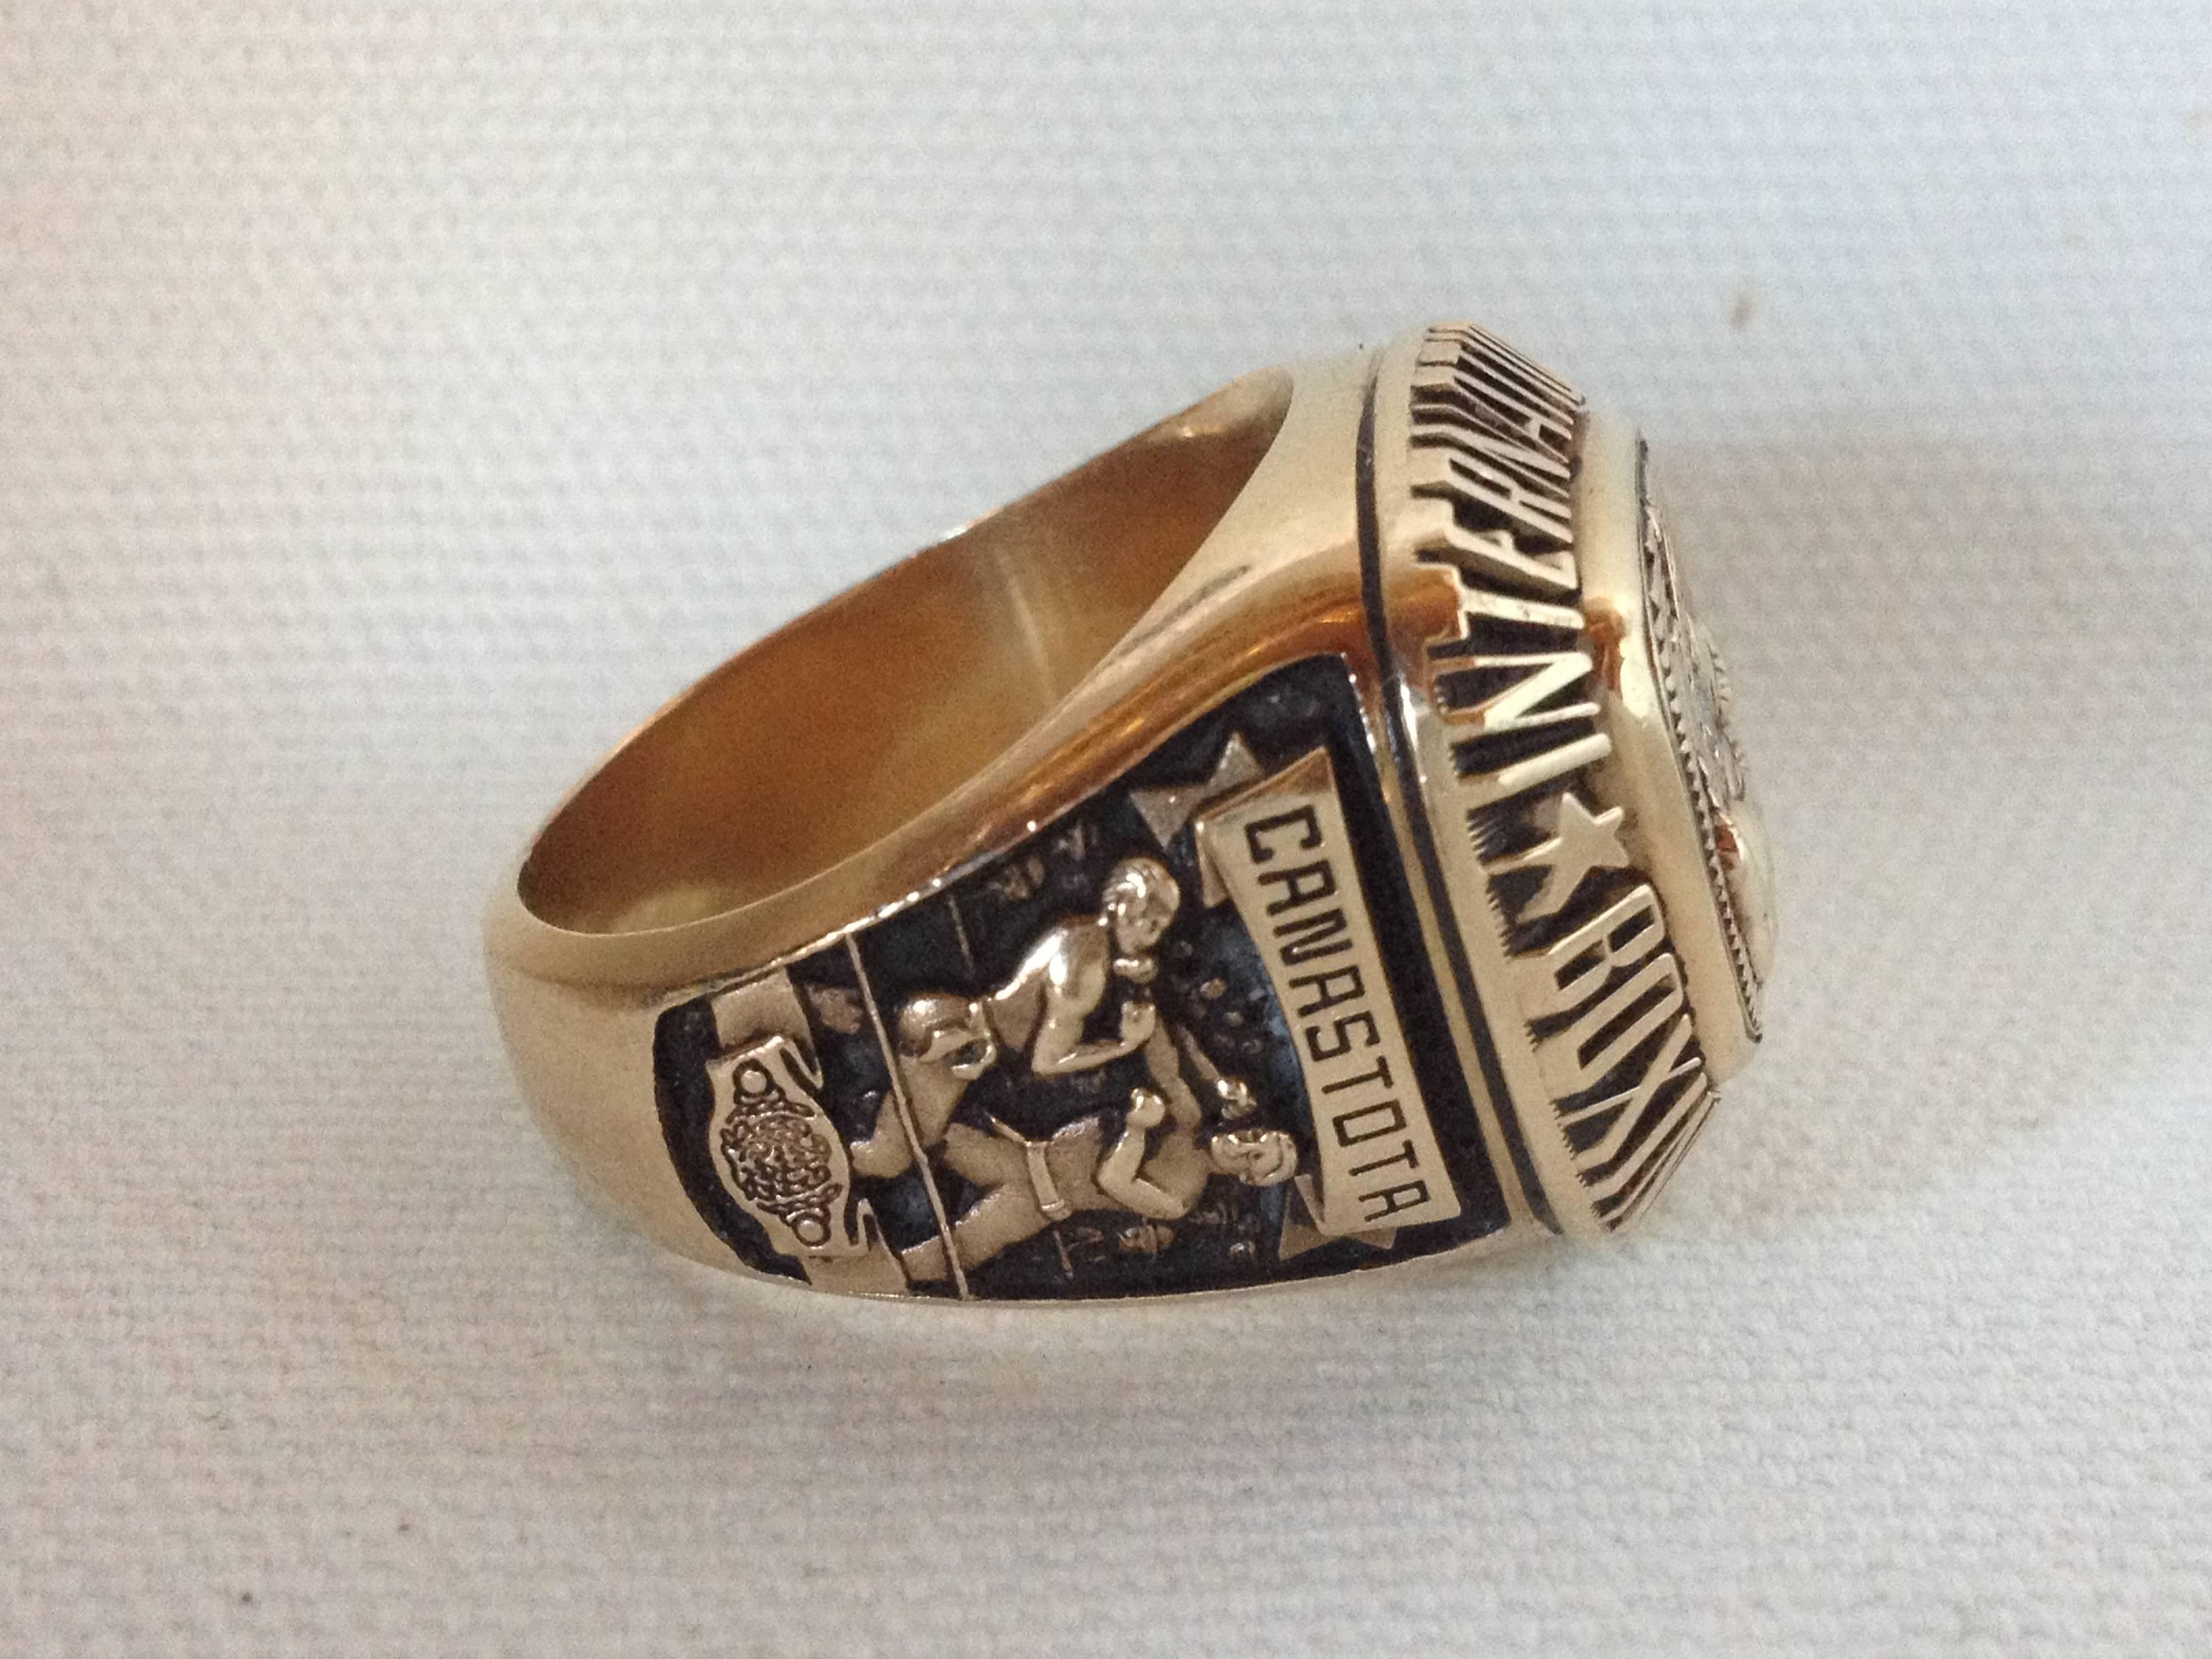 Contemporary Riddick Bowe International Boxing Hall of Fame Ring fighting sports gold diamond For Sale